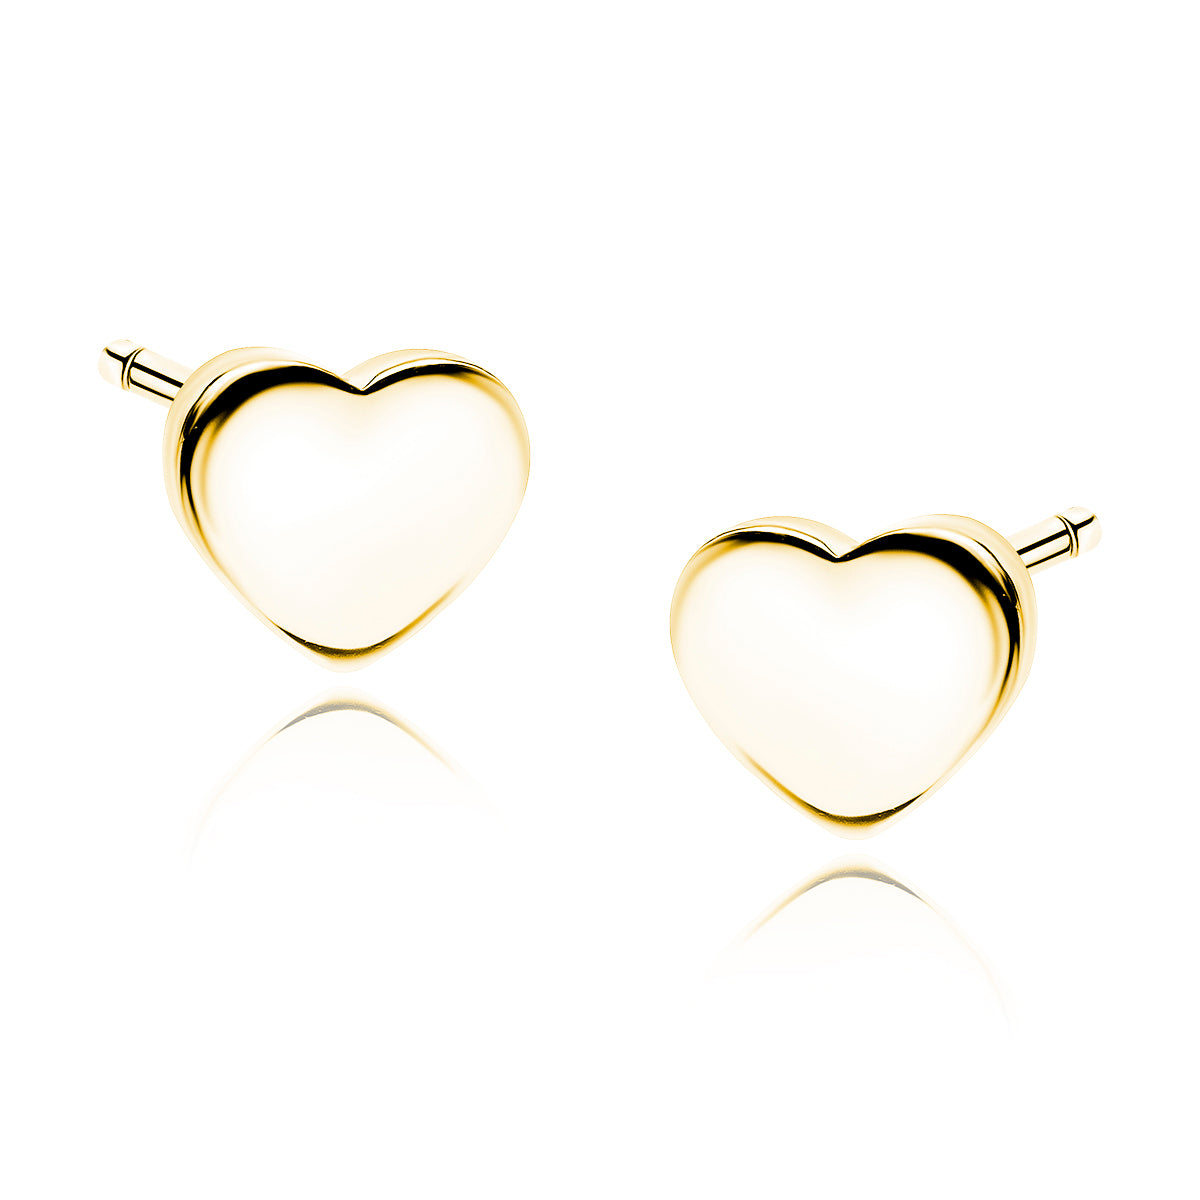 14ct Gold Plated 925 Sterling Silver Heart Stud Earrings